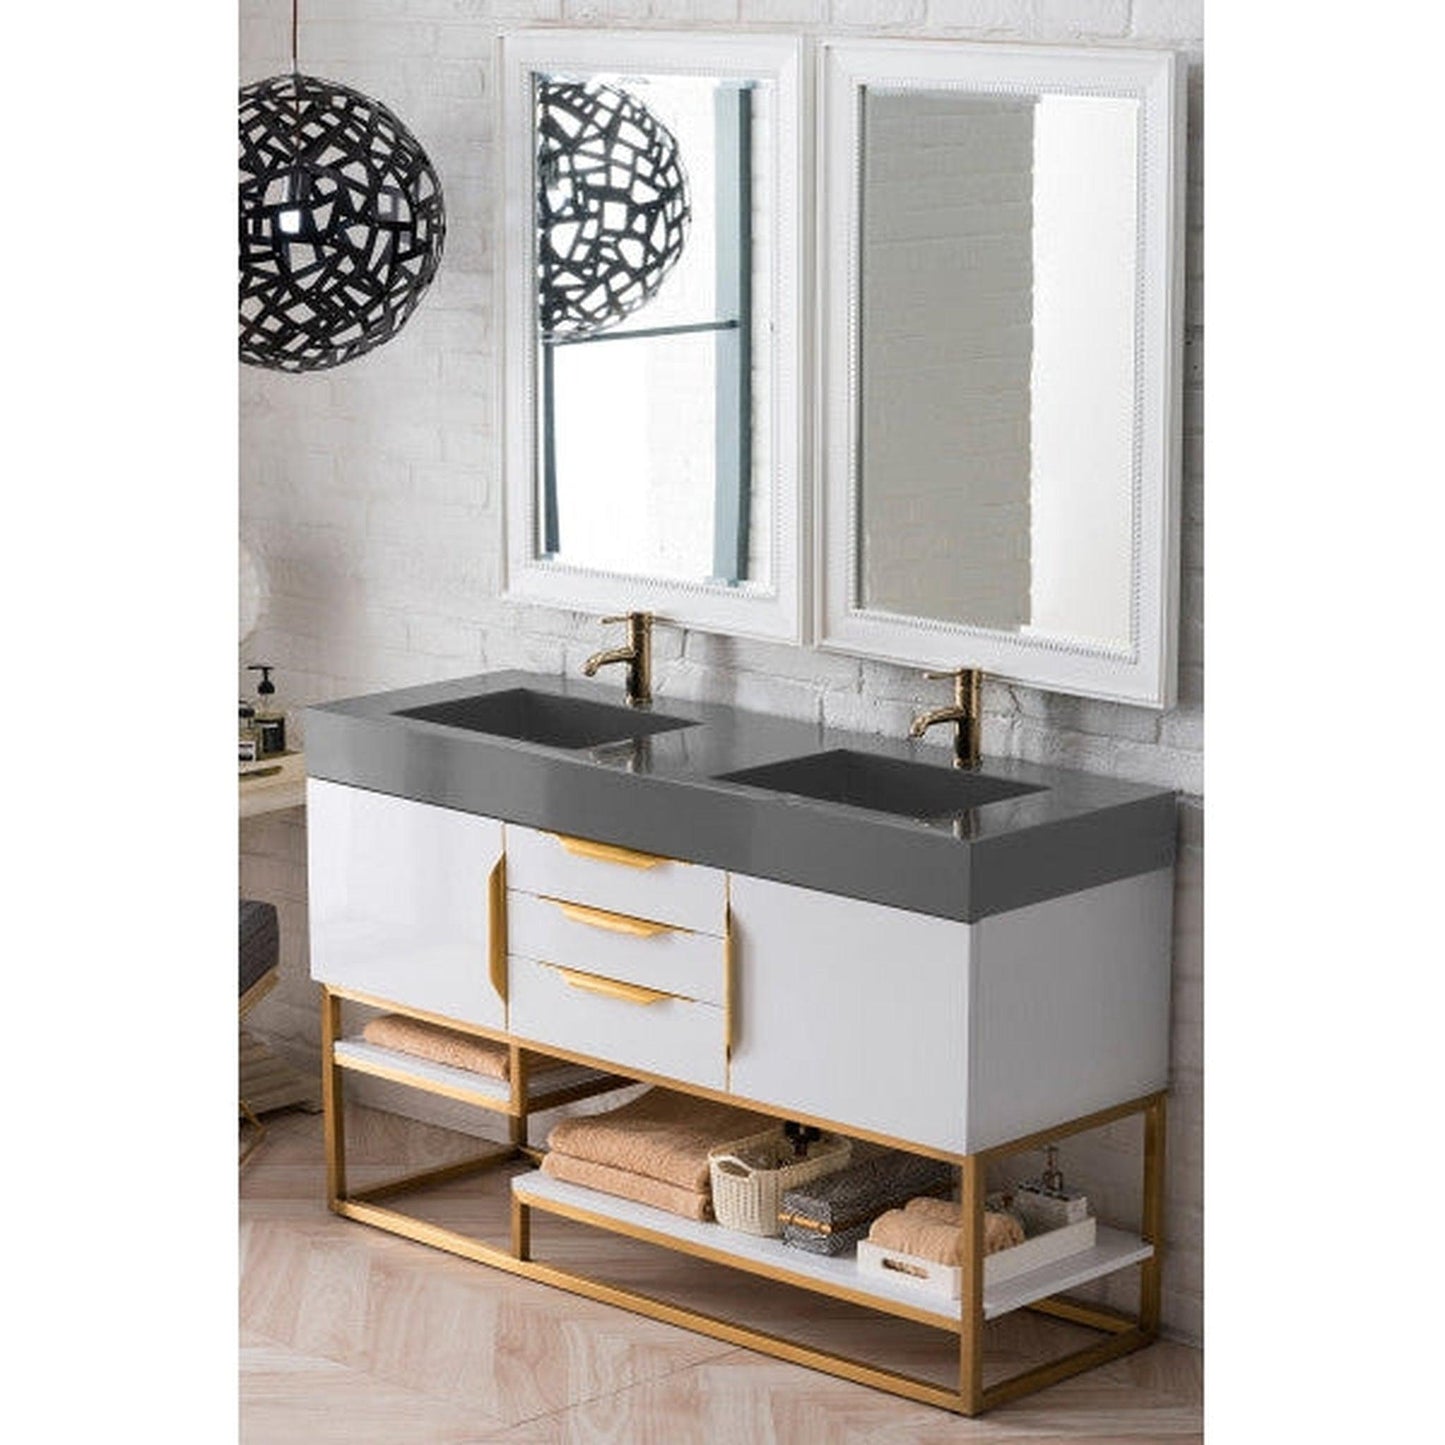 James Martin Columbia 59" Double Glossy White Bathroom Vanity With Radiant Gold Hardware and 6" Glossy Dusk Gray Composite Countertop